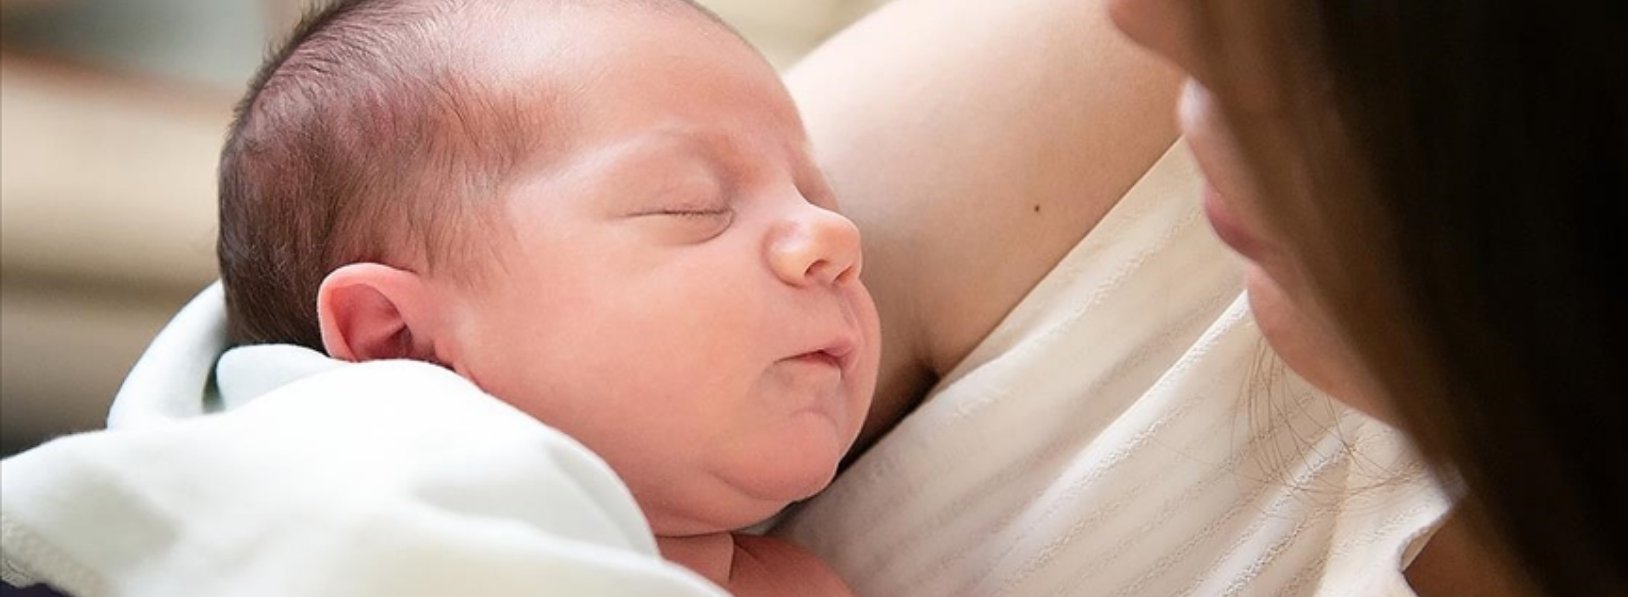 Breast milk protects babies from Covid-19 too.